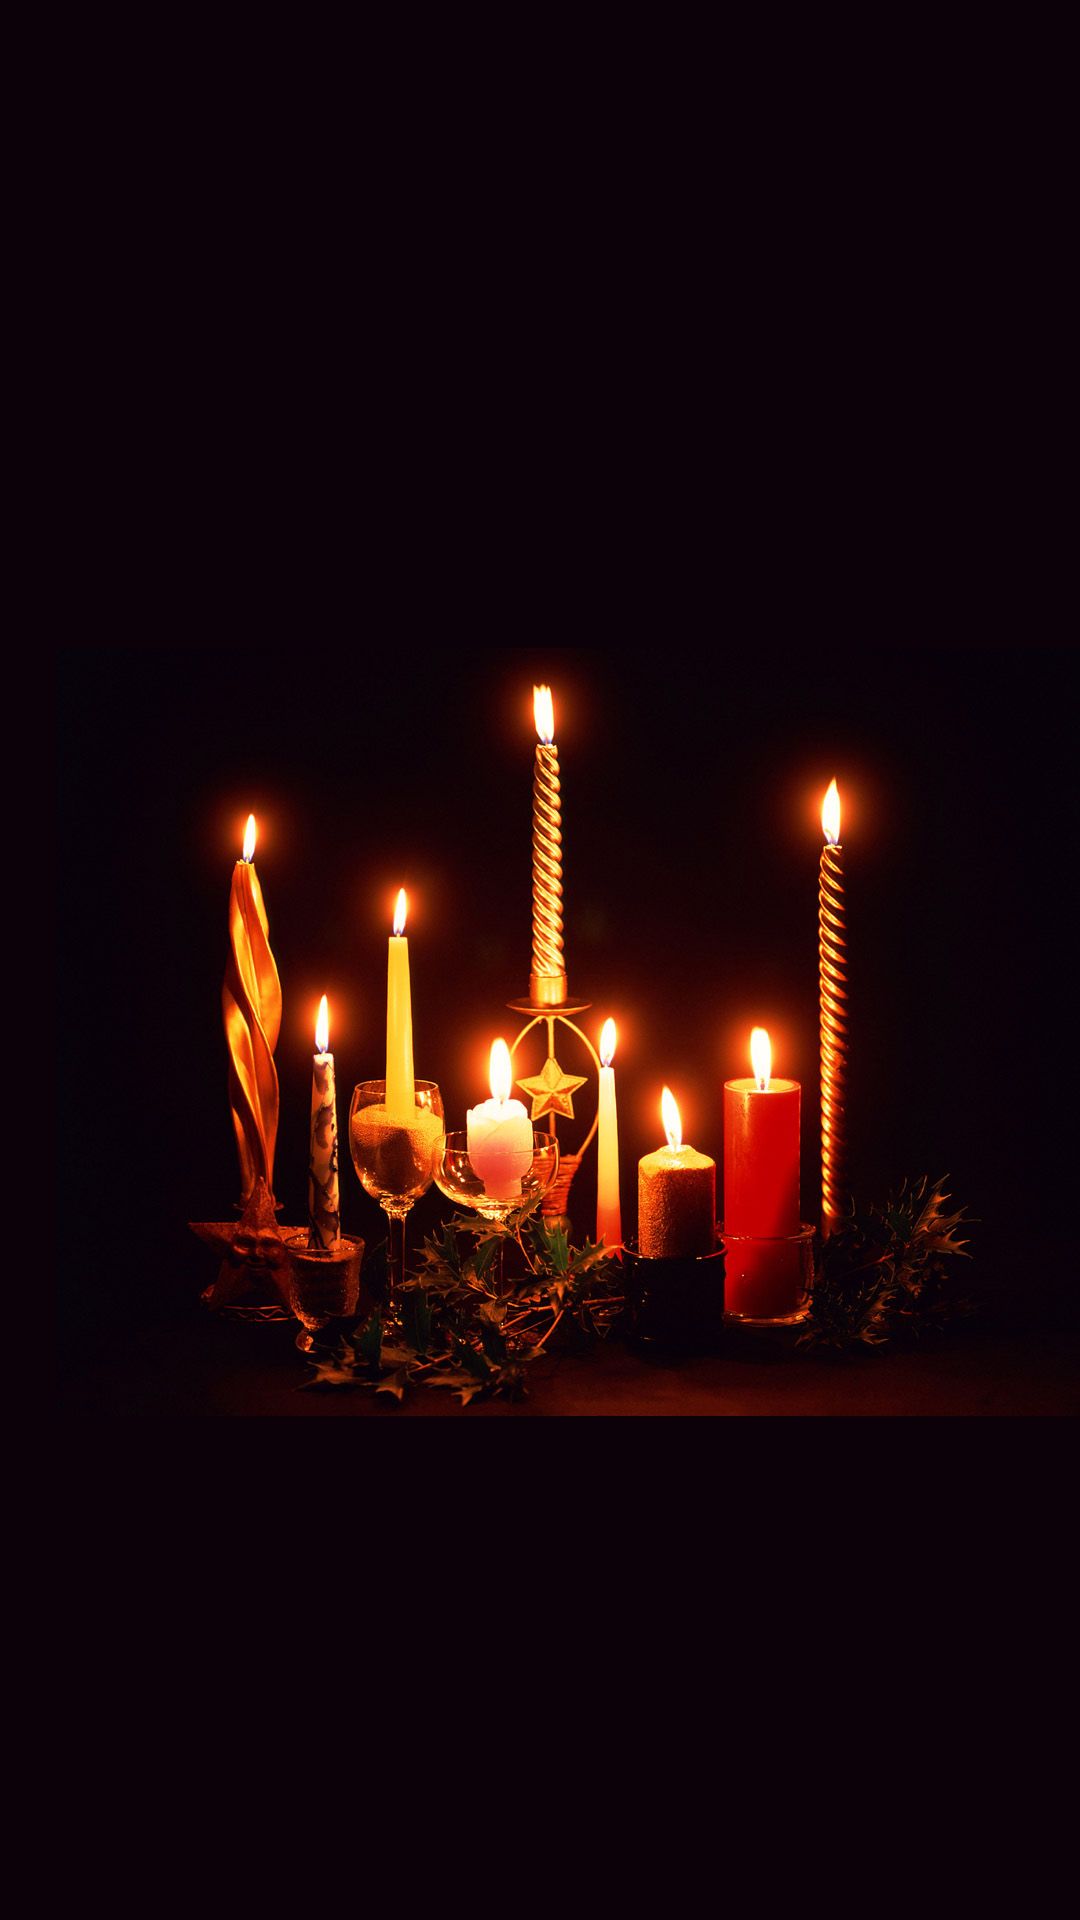 Variety Christmas Candles Android Wallpaper free download